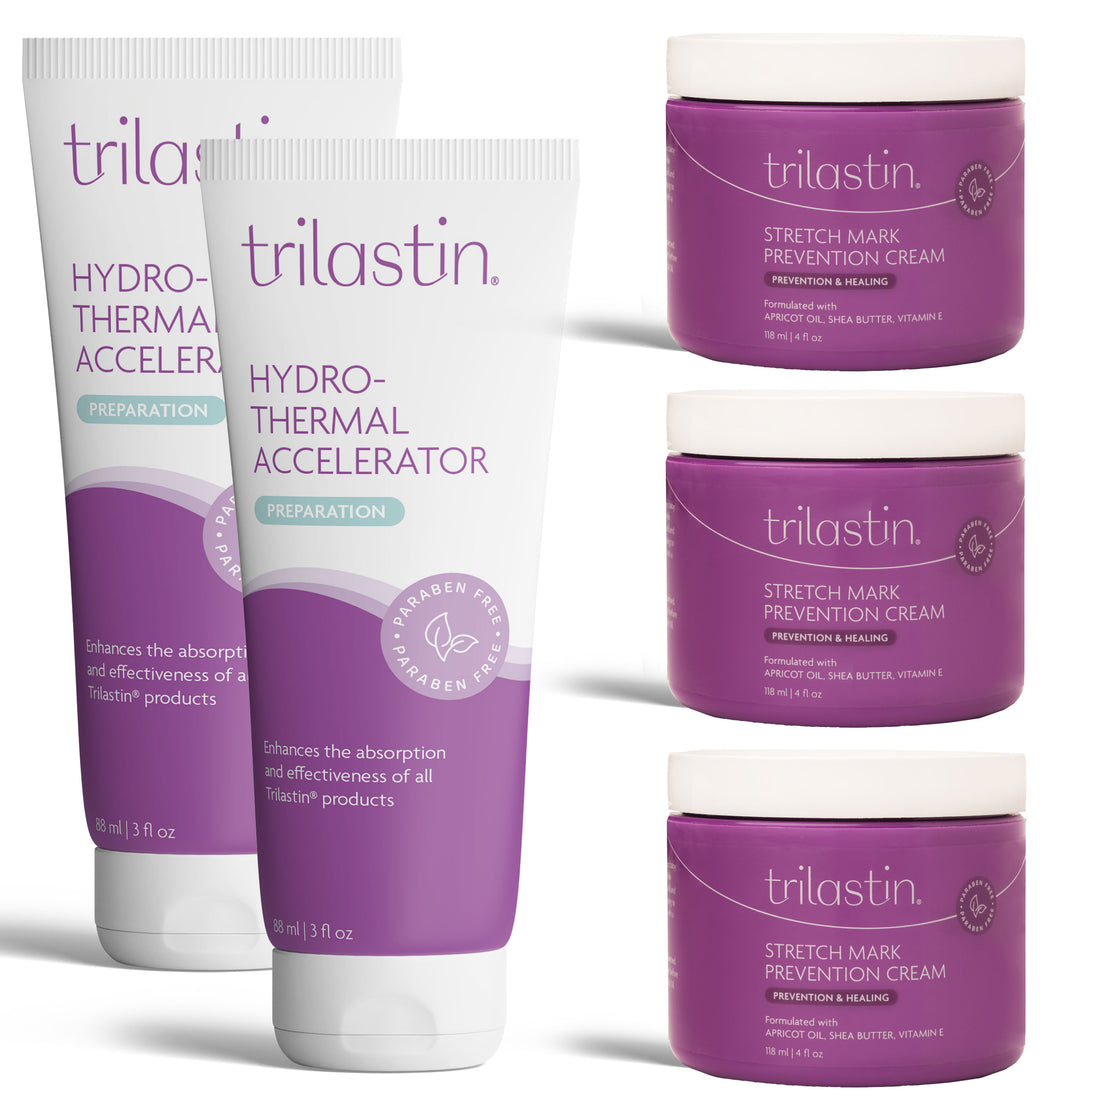 TriLASTIN Stretch Mark Prevention Hydration Duo - 3 month supply